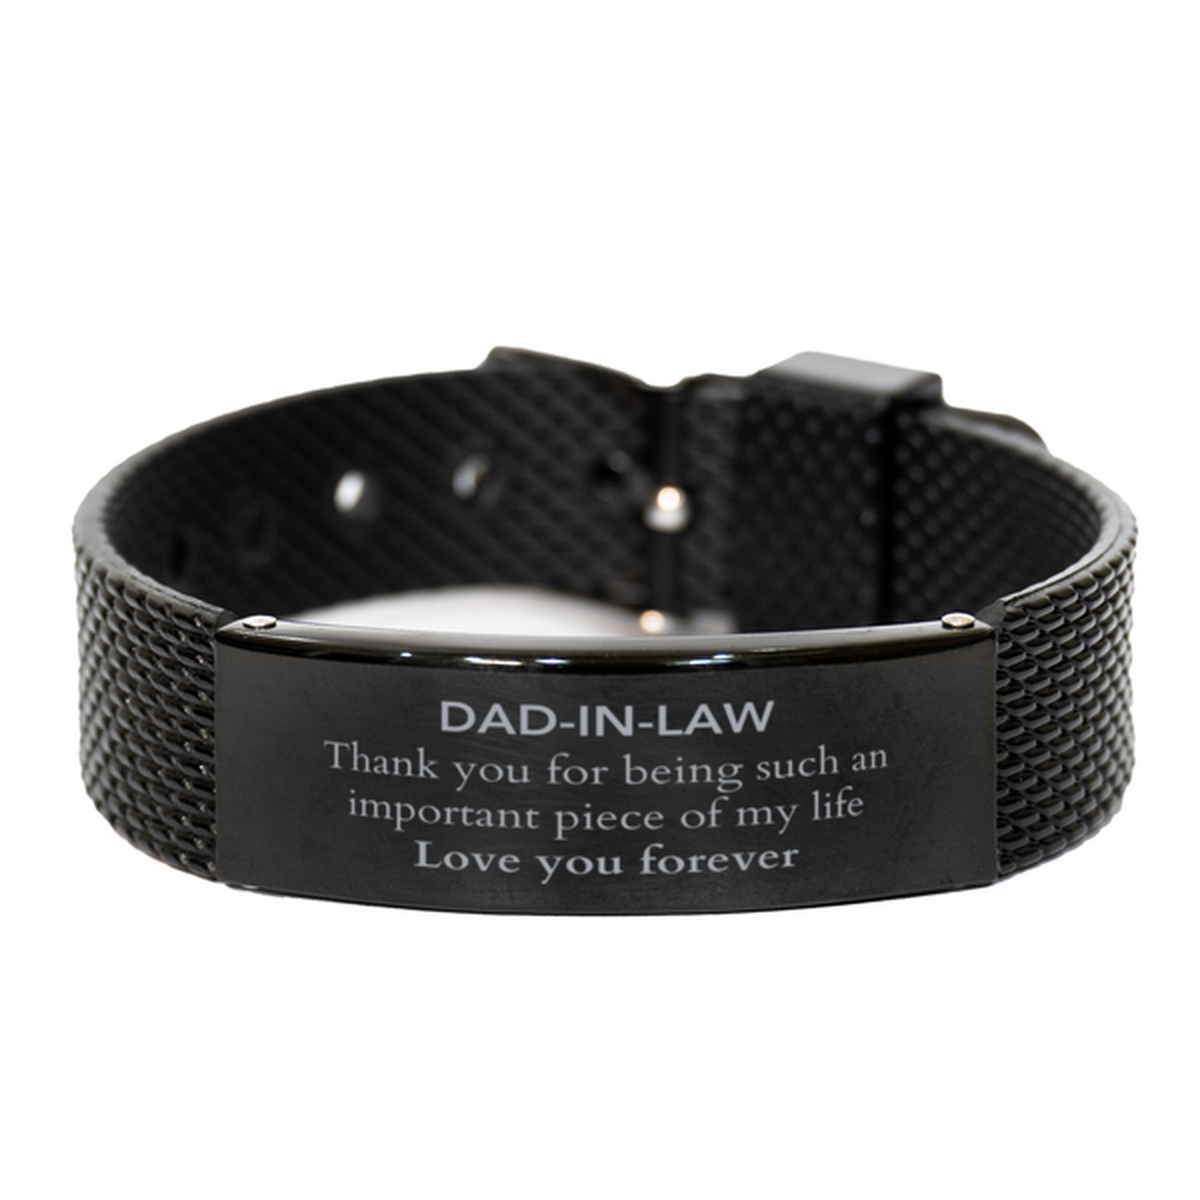 Appropriate Dad-in-law Black Shark Mesh Bracelet Epic Birthday Gifts for Dad-in-law Thank you for being such an important piece of my life Dad-in-law Christmas Mothers Fathers Day